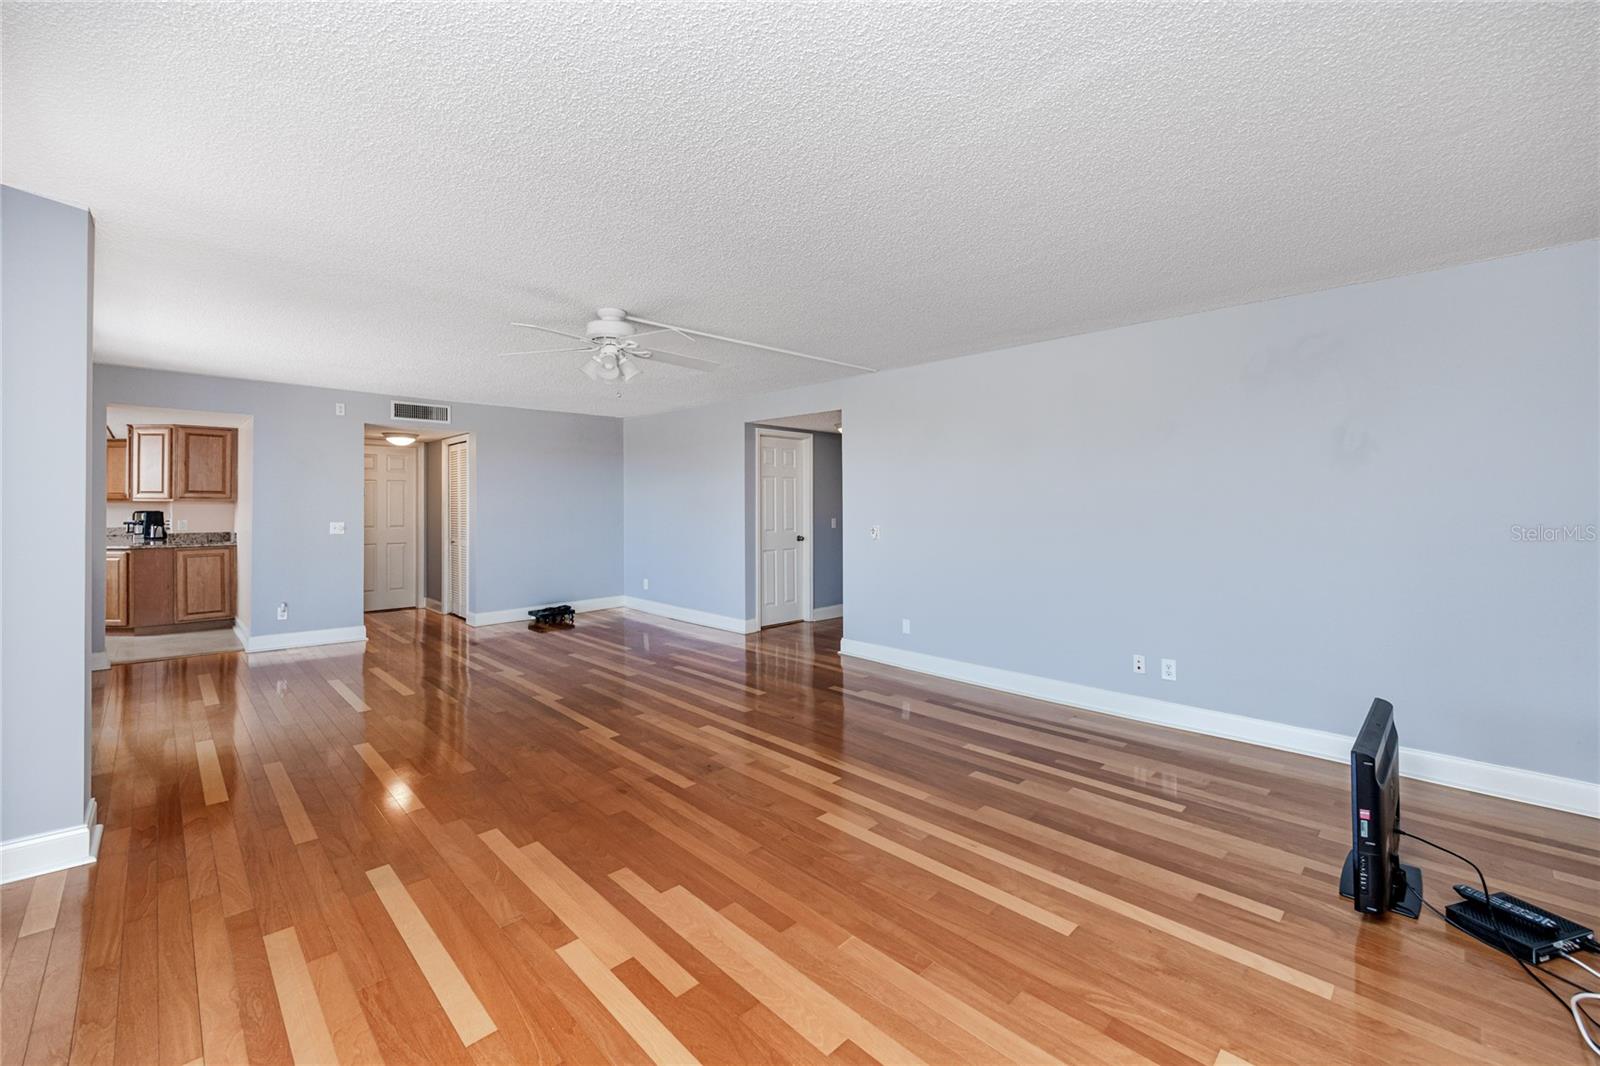 Welcome to this large 1 bedroom, 2 bath condo at Island Way!